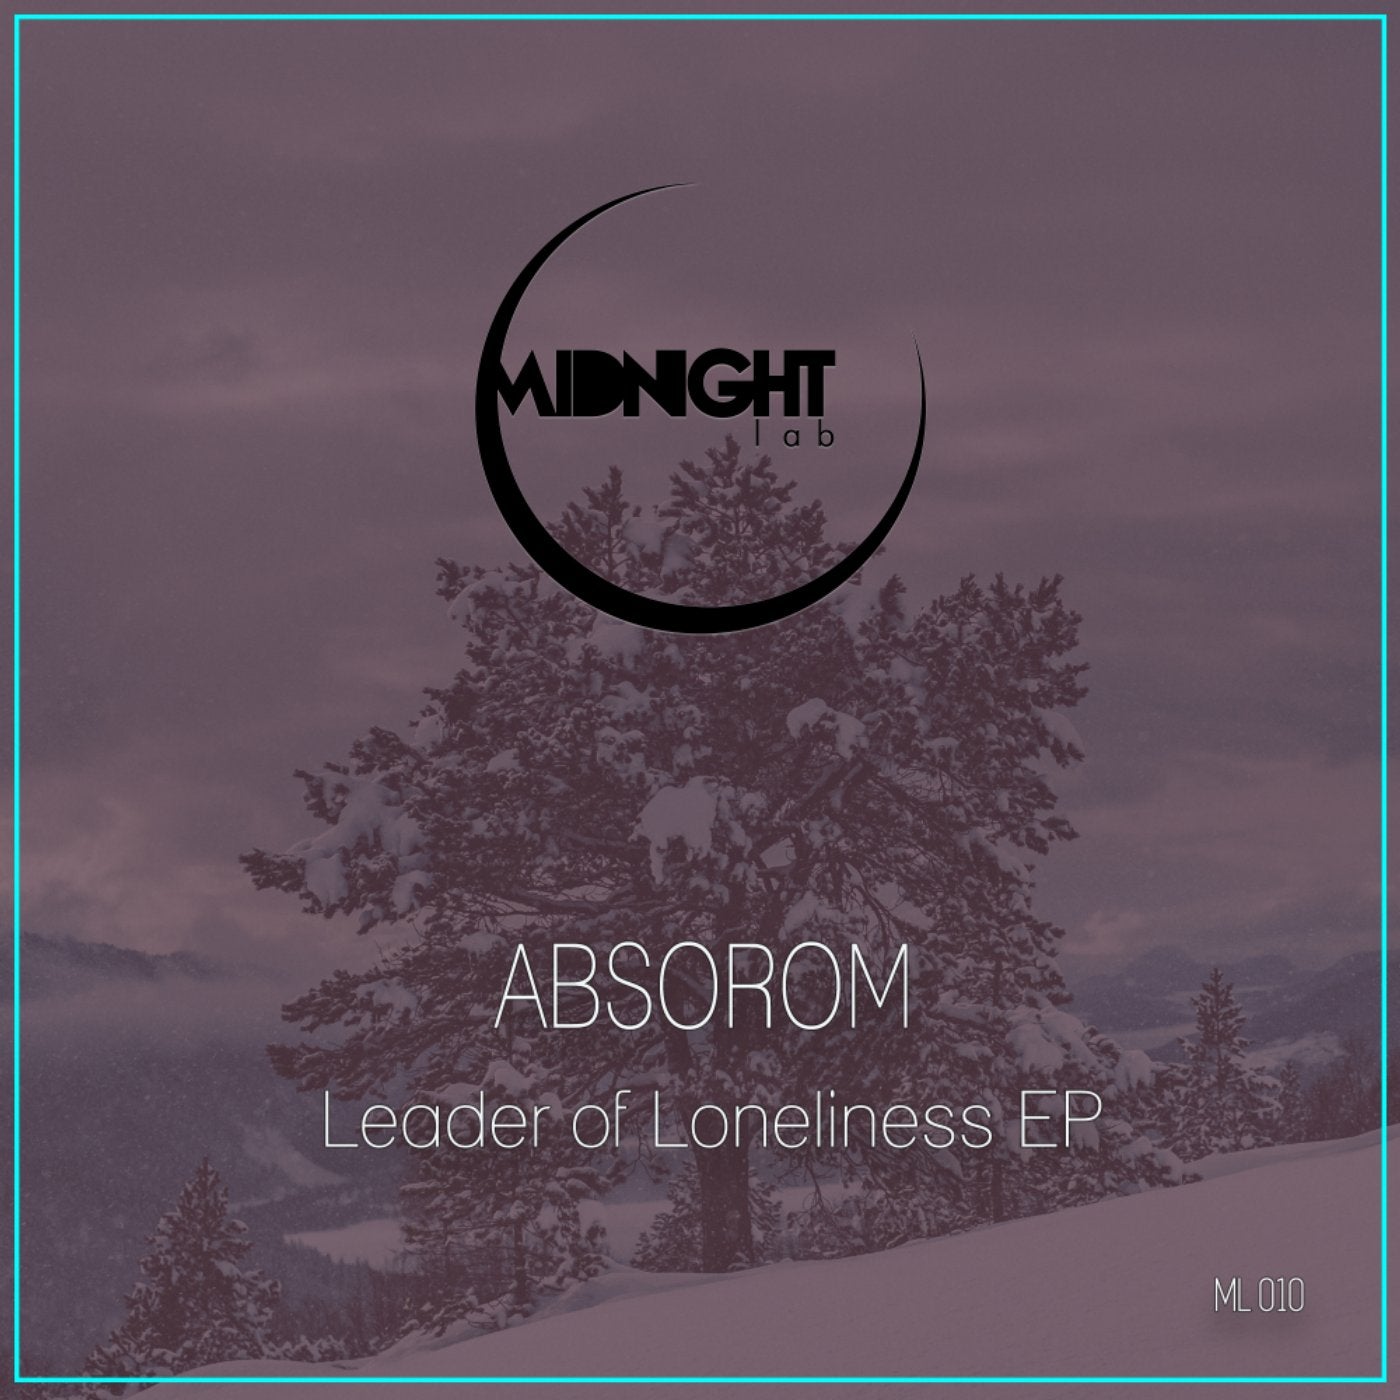 Leader of Loneliness EP